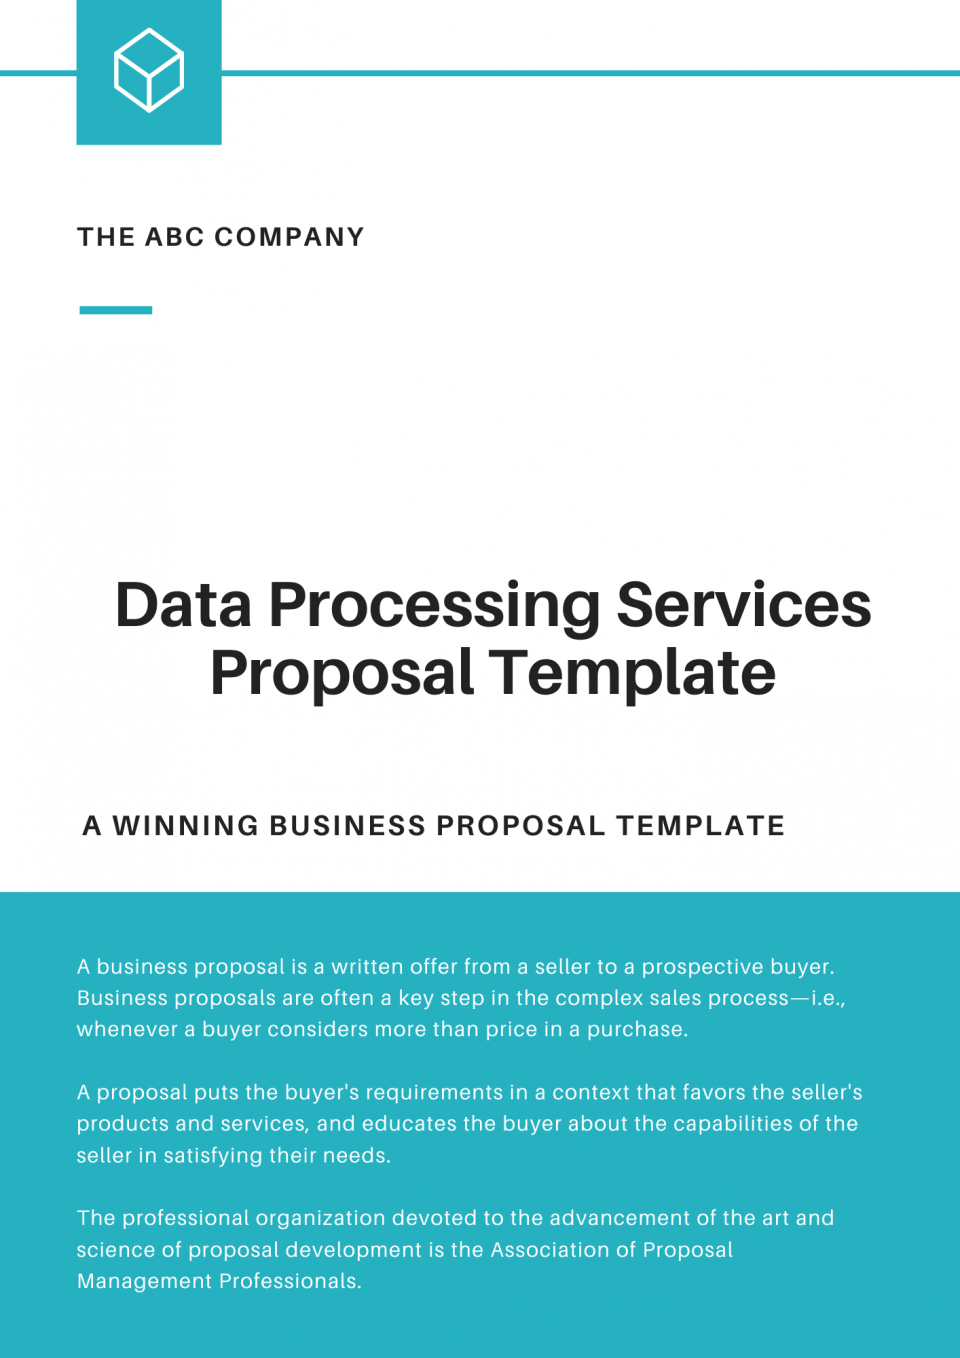 Data processing services PROPOSAL TEMPLATE